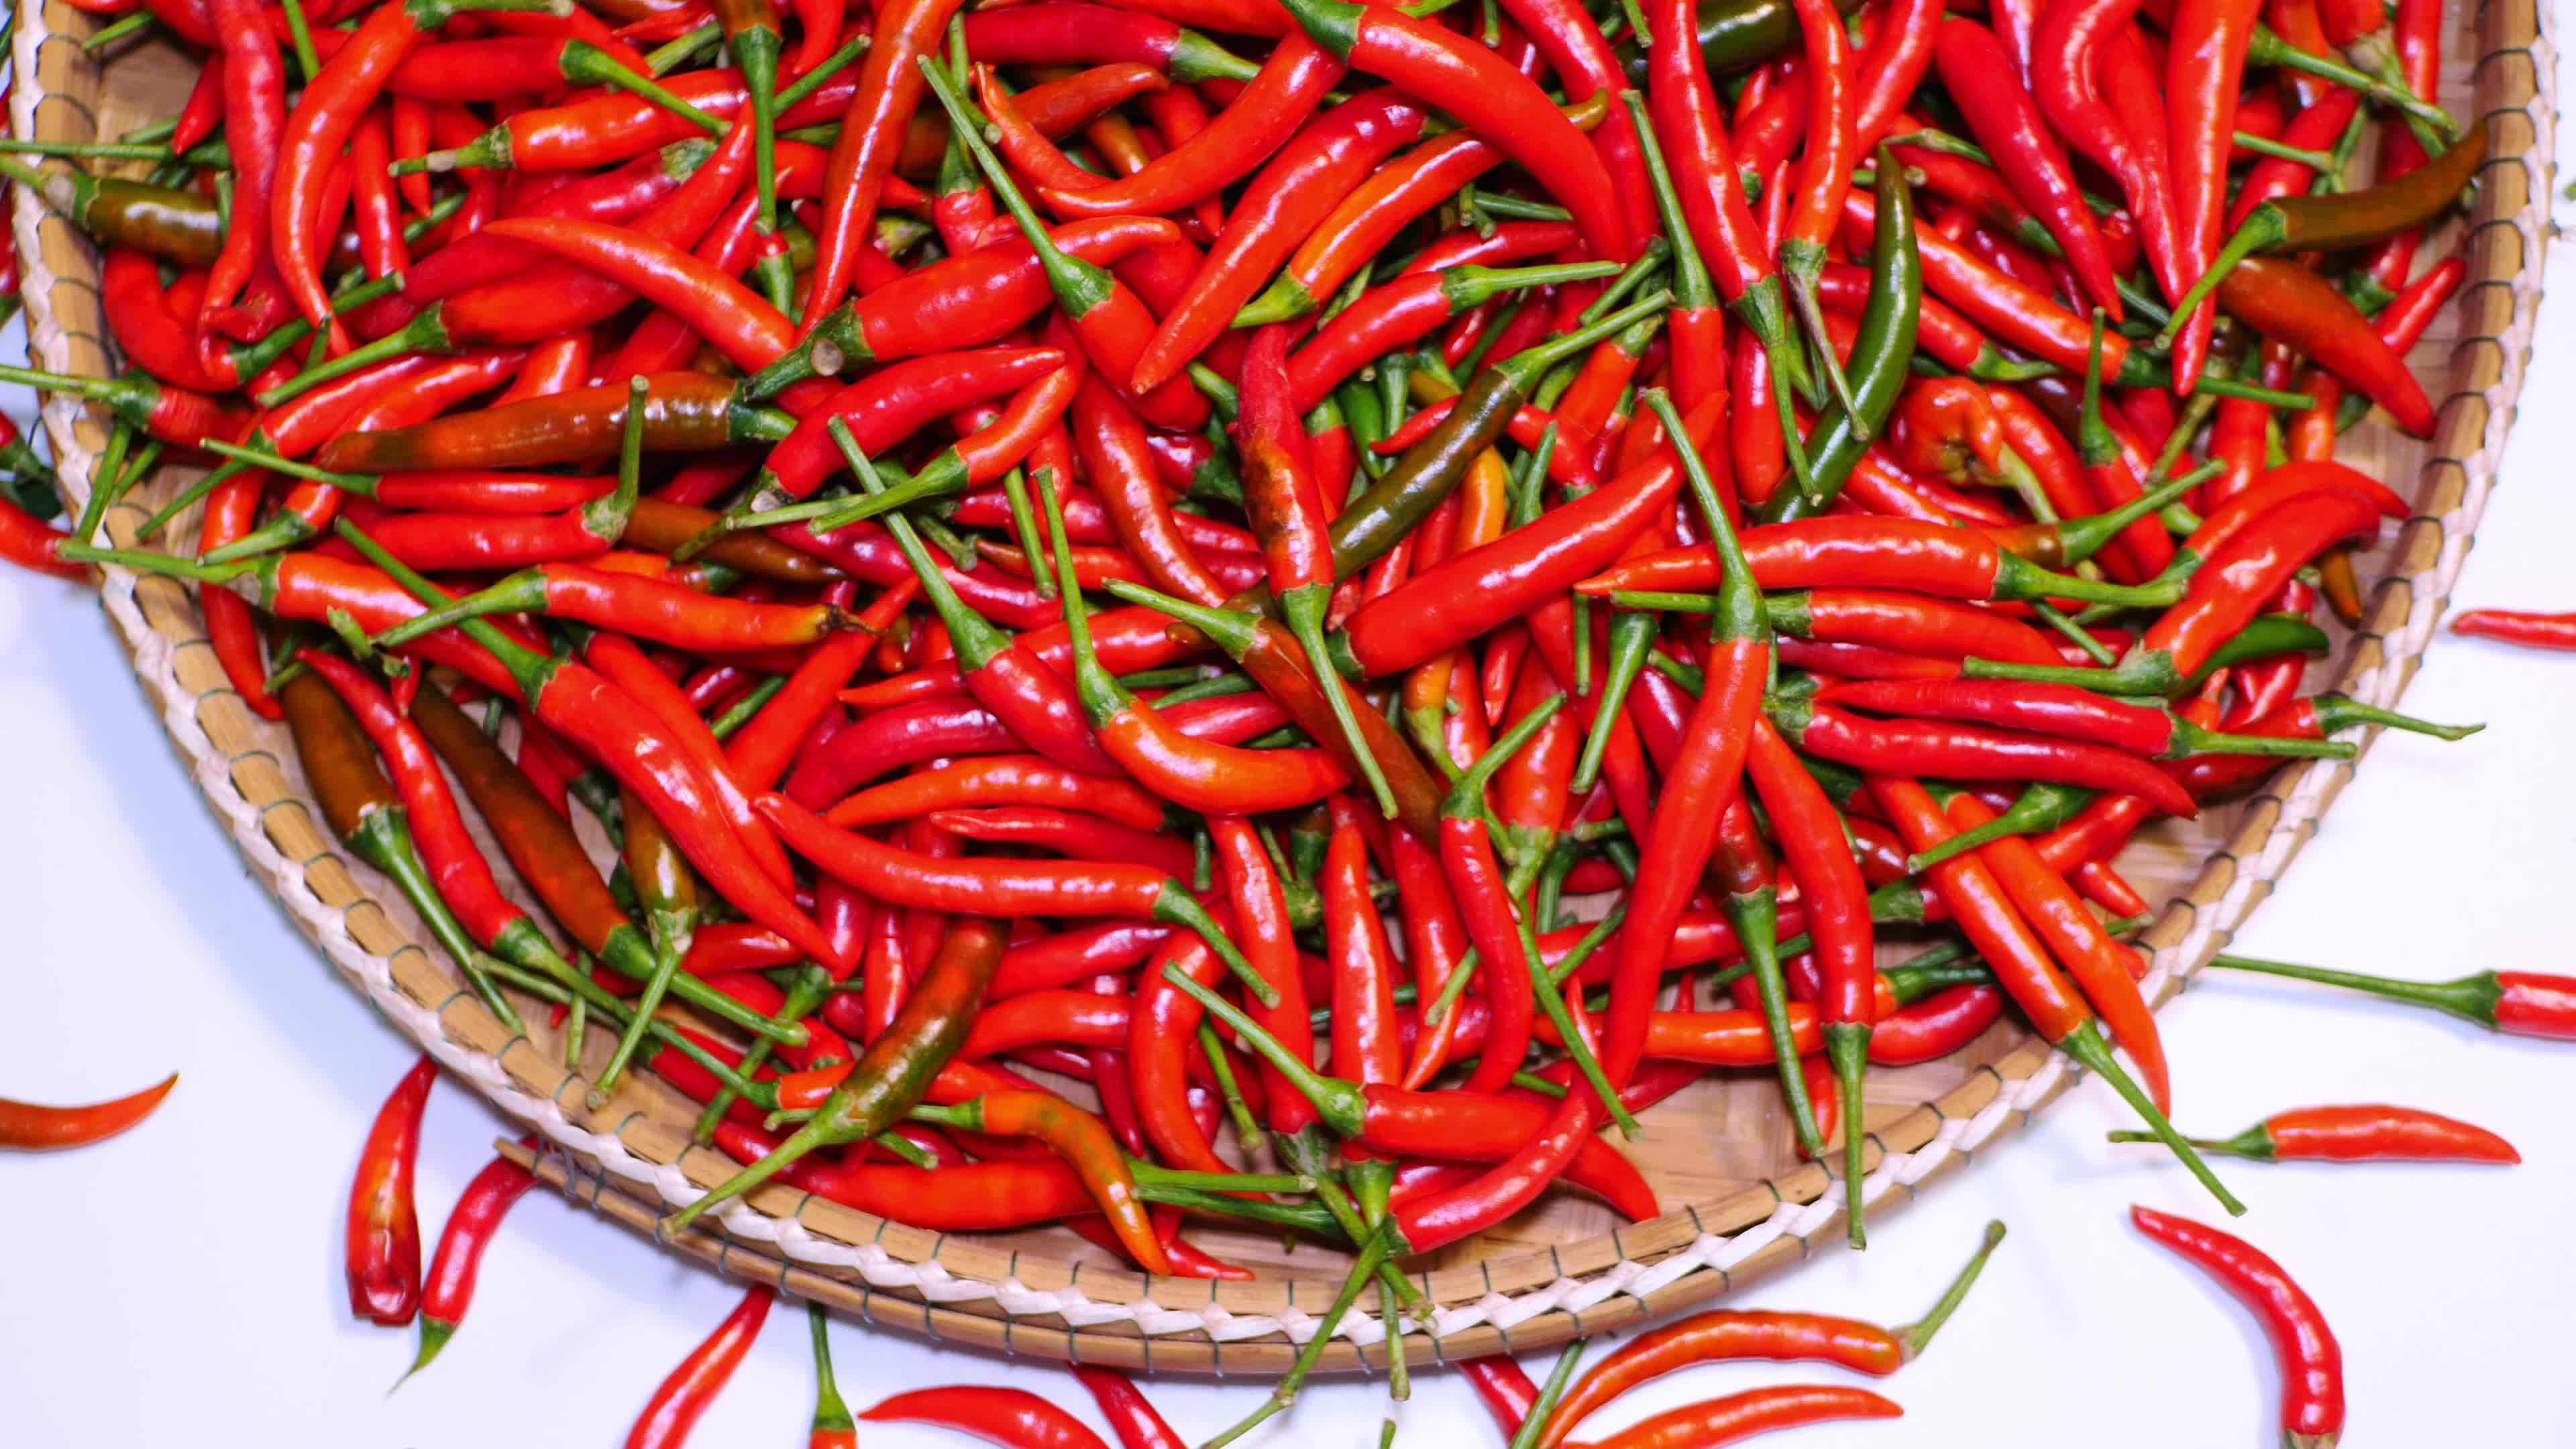 Thai spices, Flavorful seasoning, Cooking essential, Fiery red chillies, 3840x2160 4K Desktop